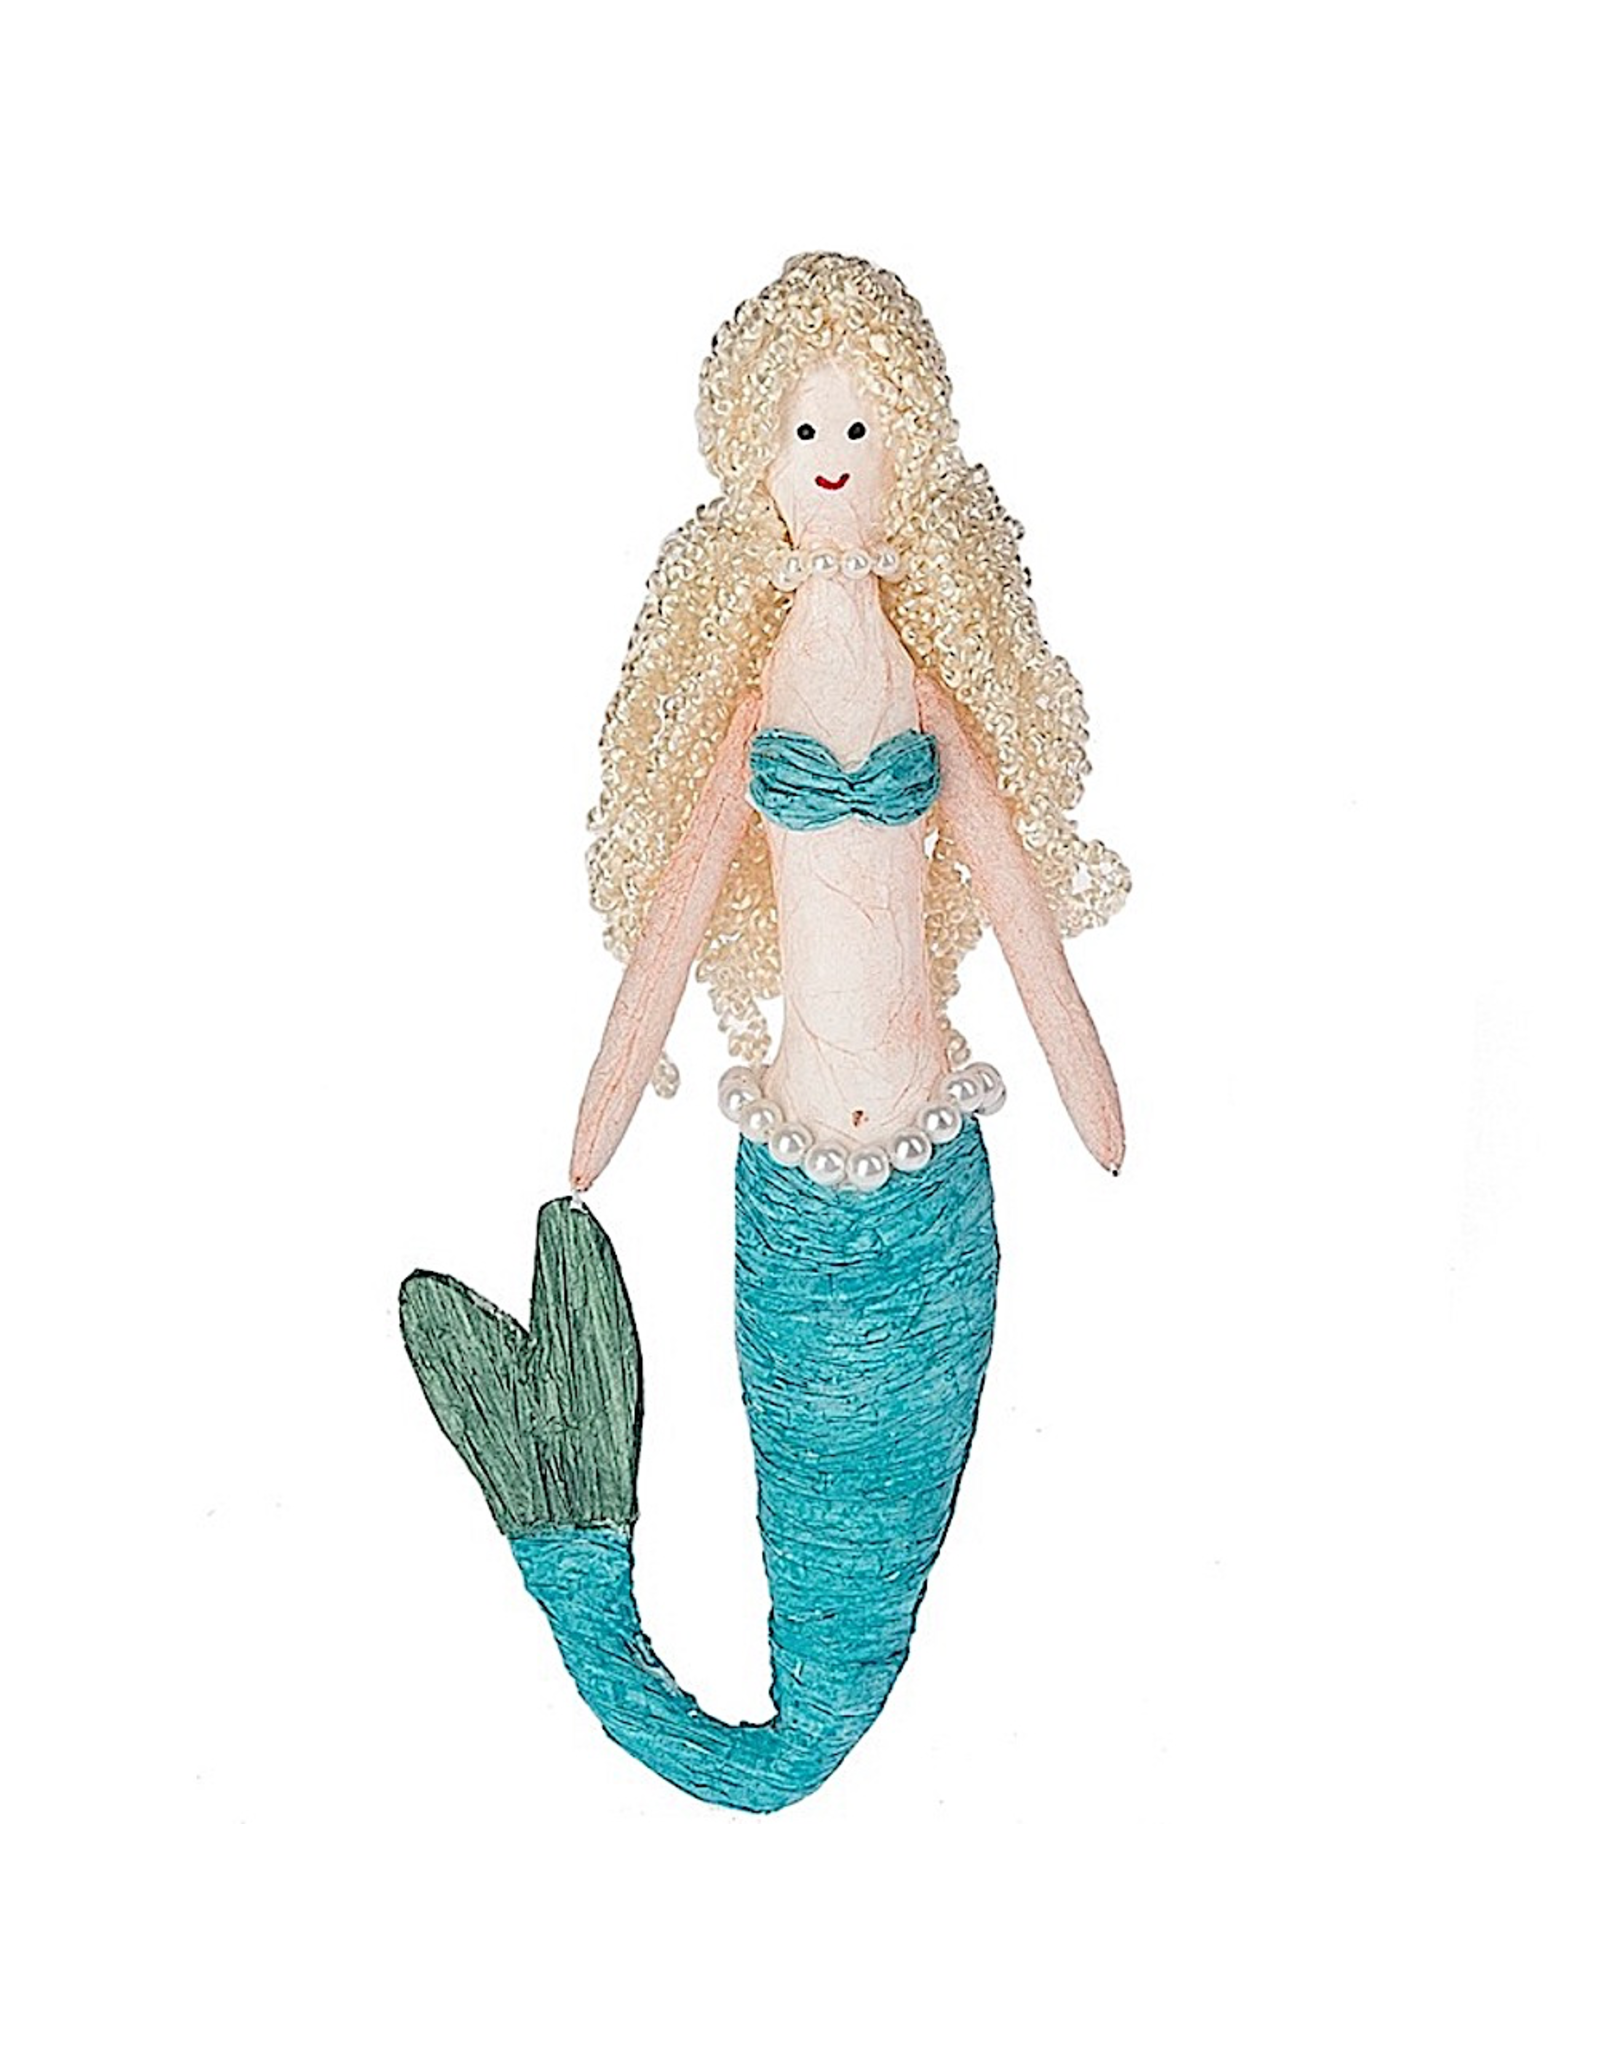 Midwest-CBK Mermaid Doll Paper-Polyester Figurine Decoration 8 inch